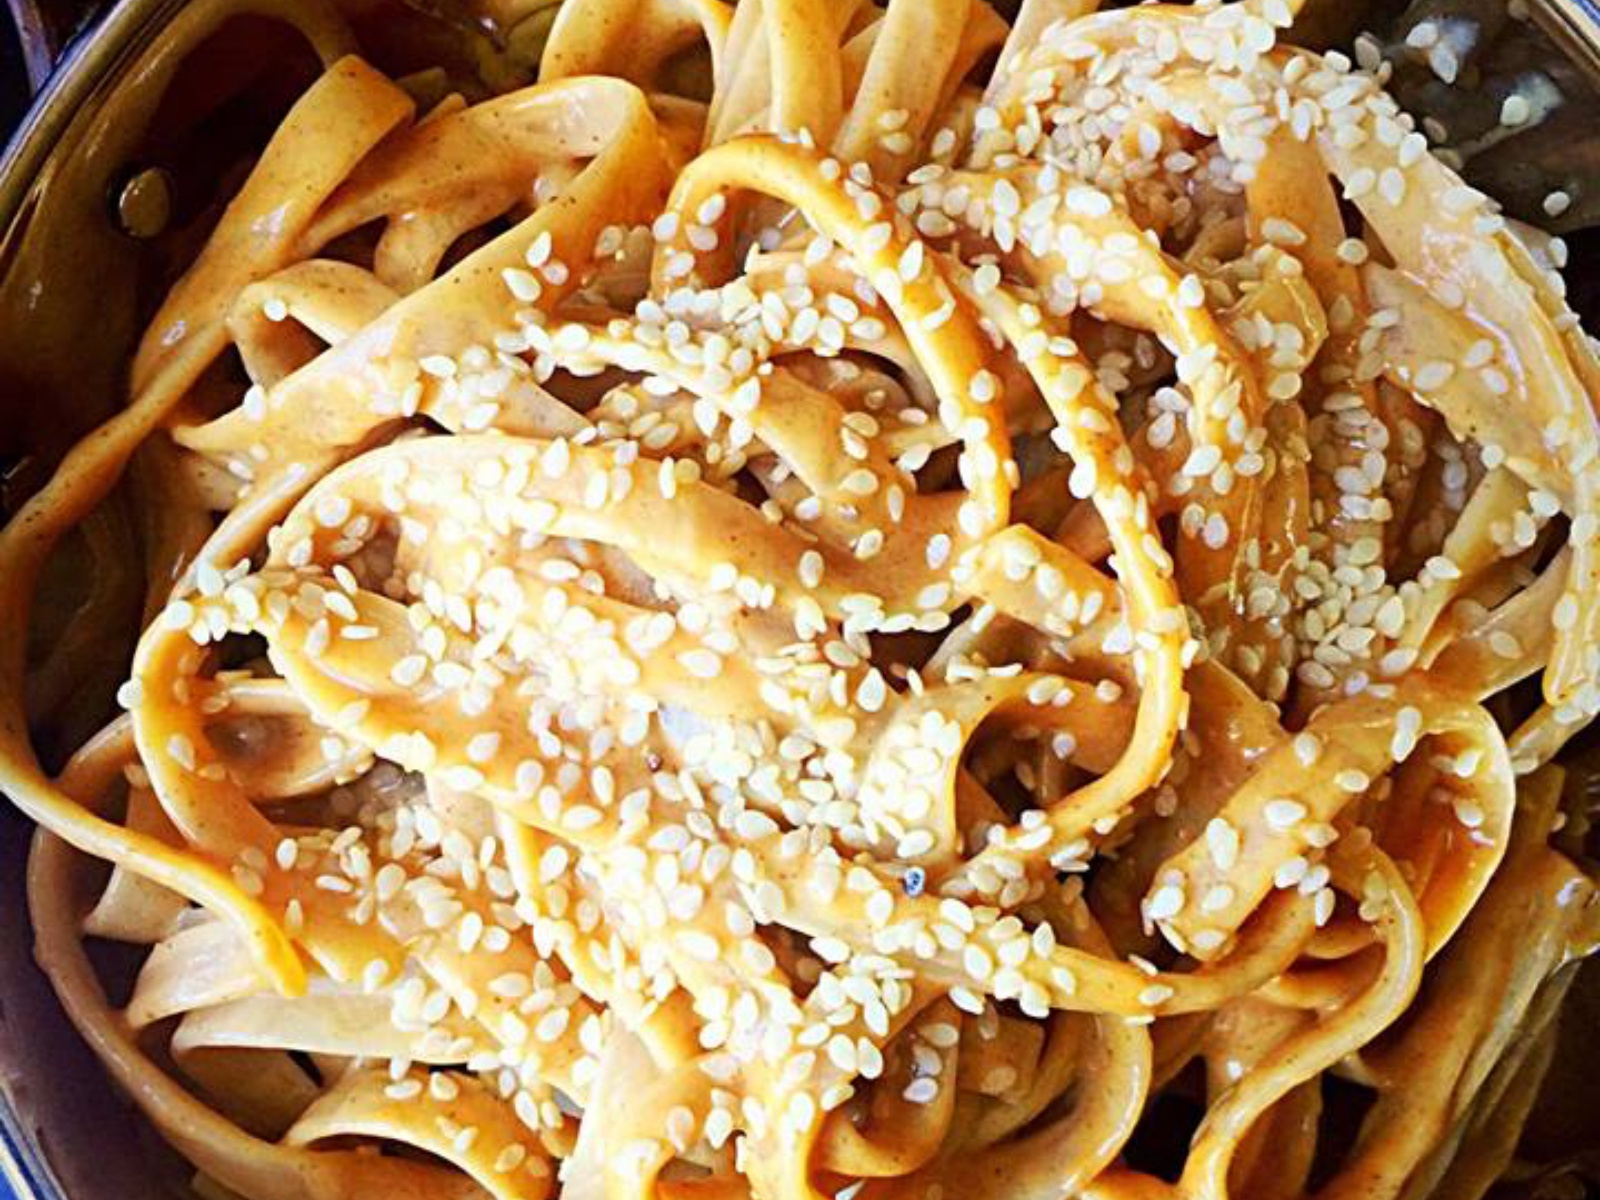 Noodles with peanuts and sesame in 10 minutes